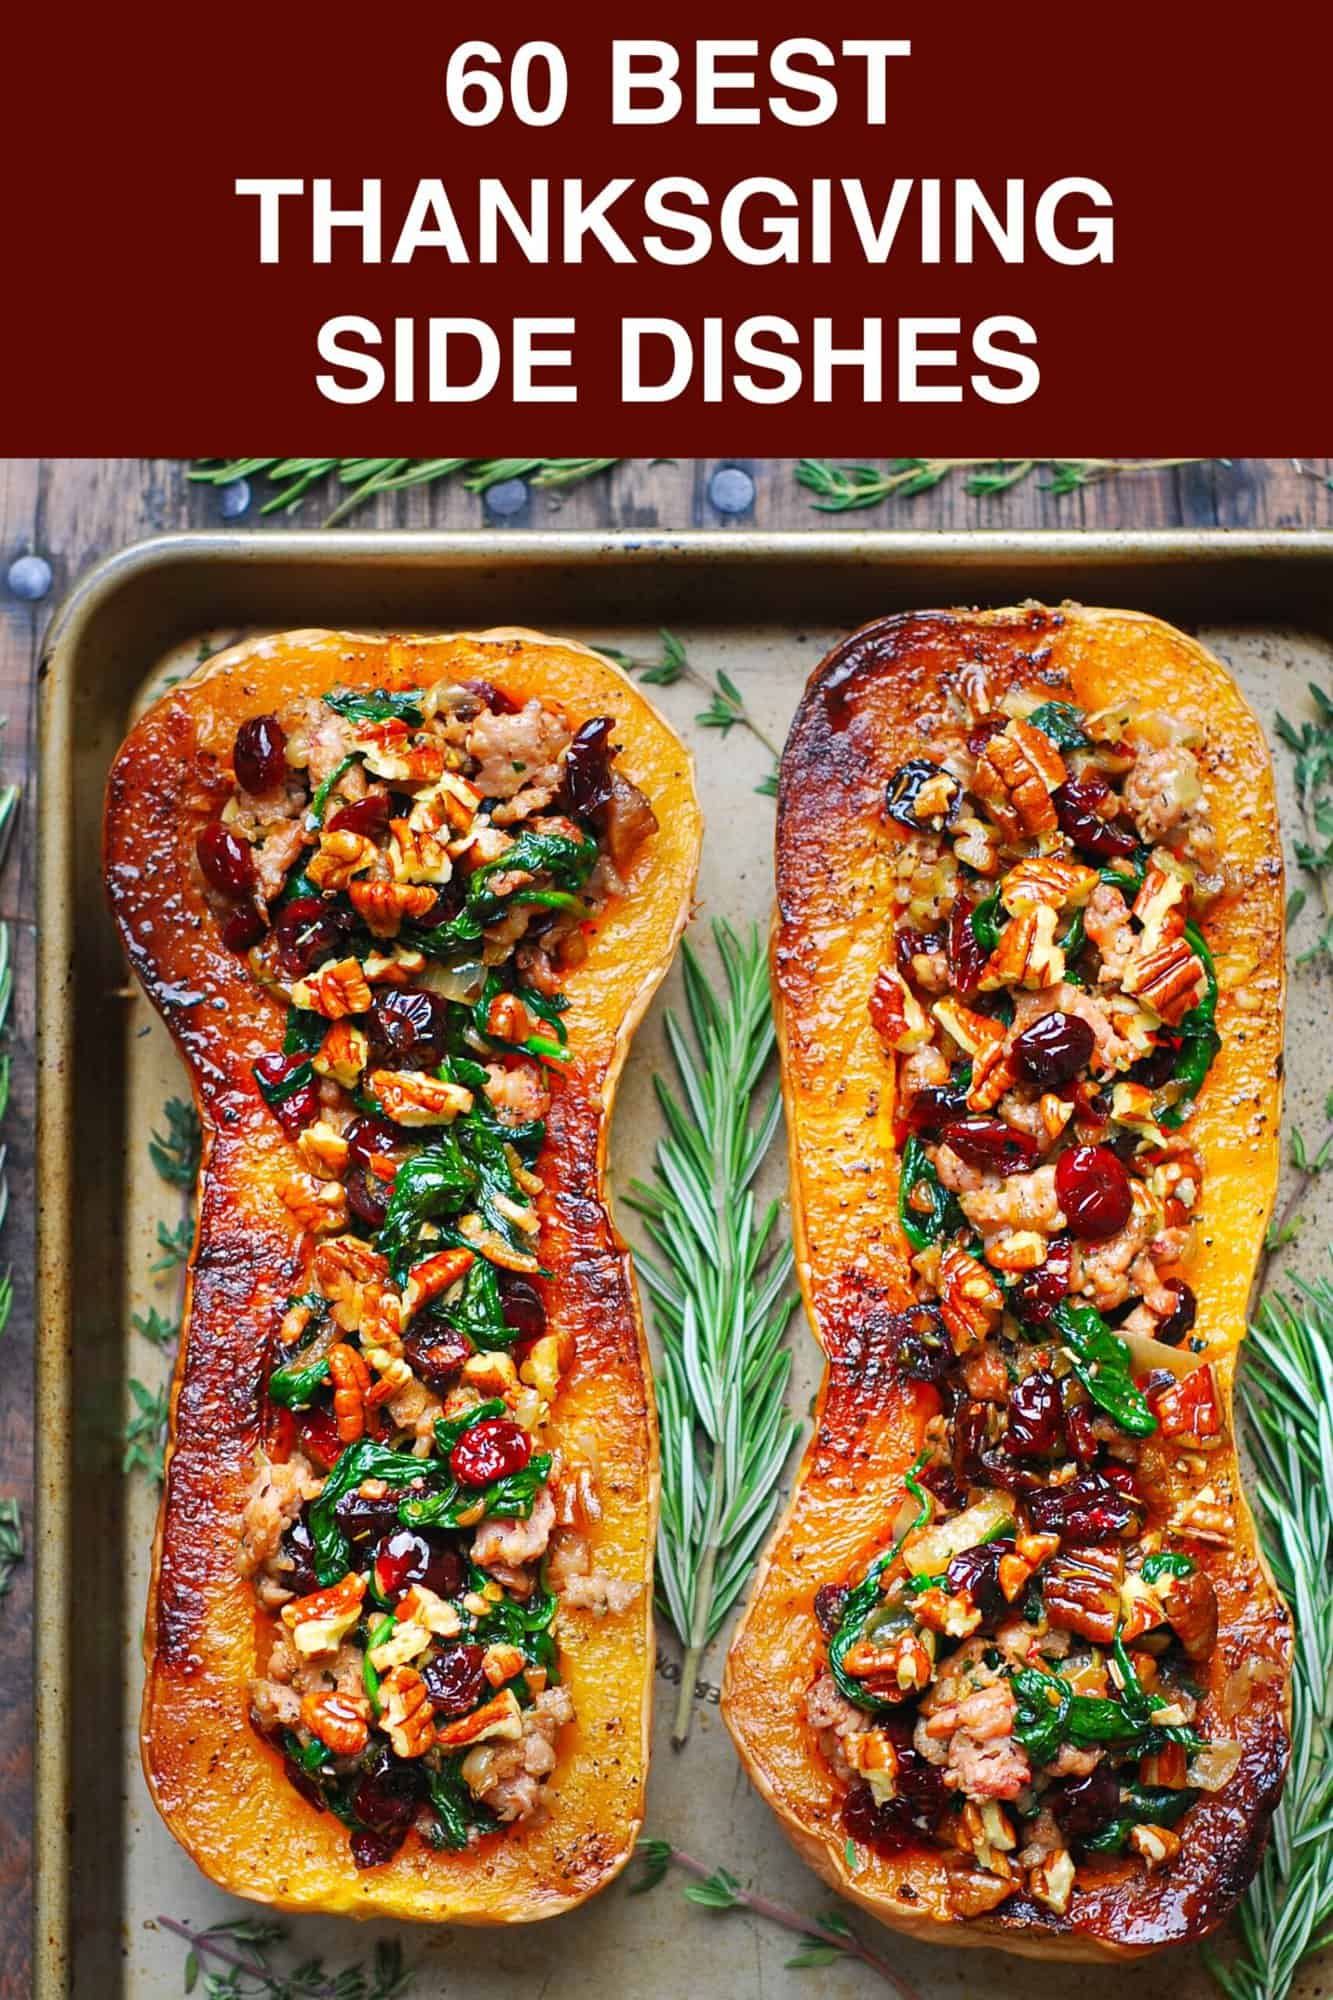 Stuffed Butternut Squash with Sausage, Spinach, Dried Cranberries, and Pecans - on a baking sheet.